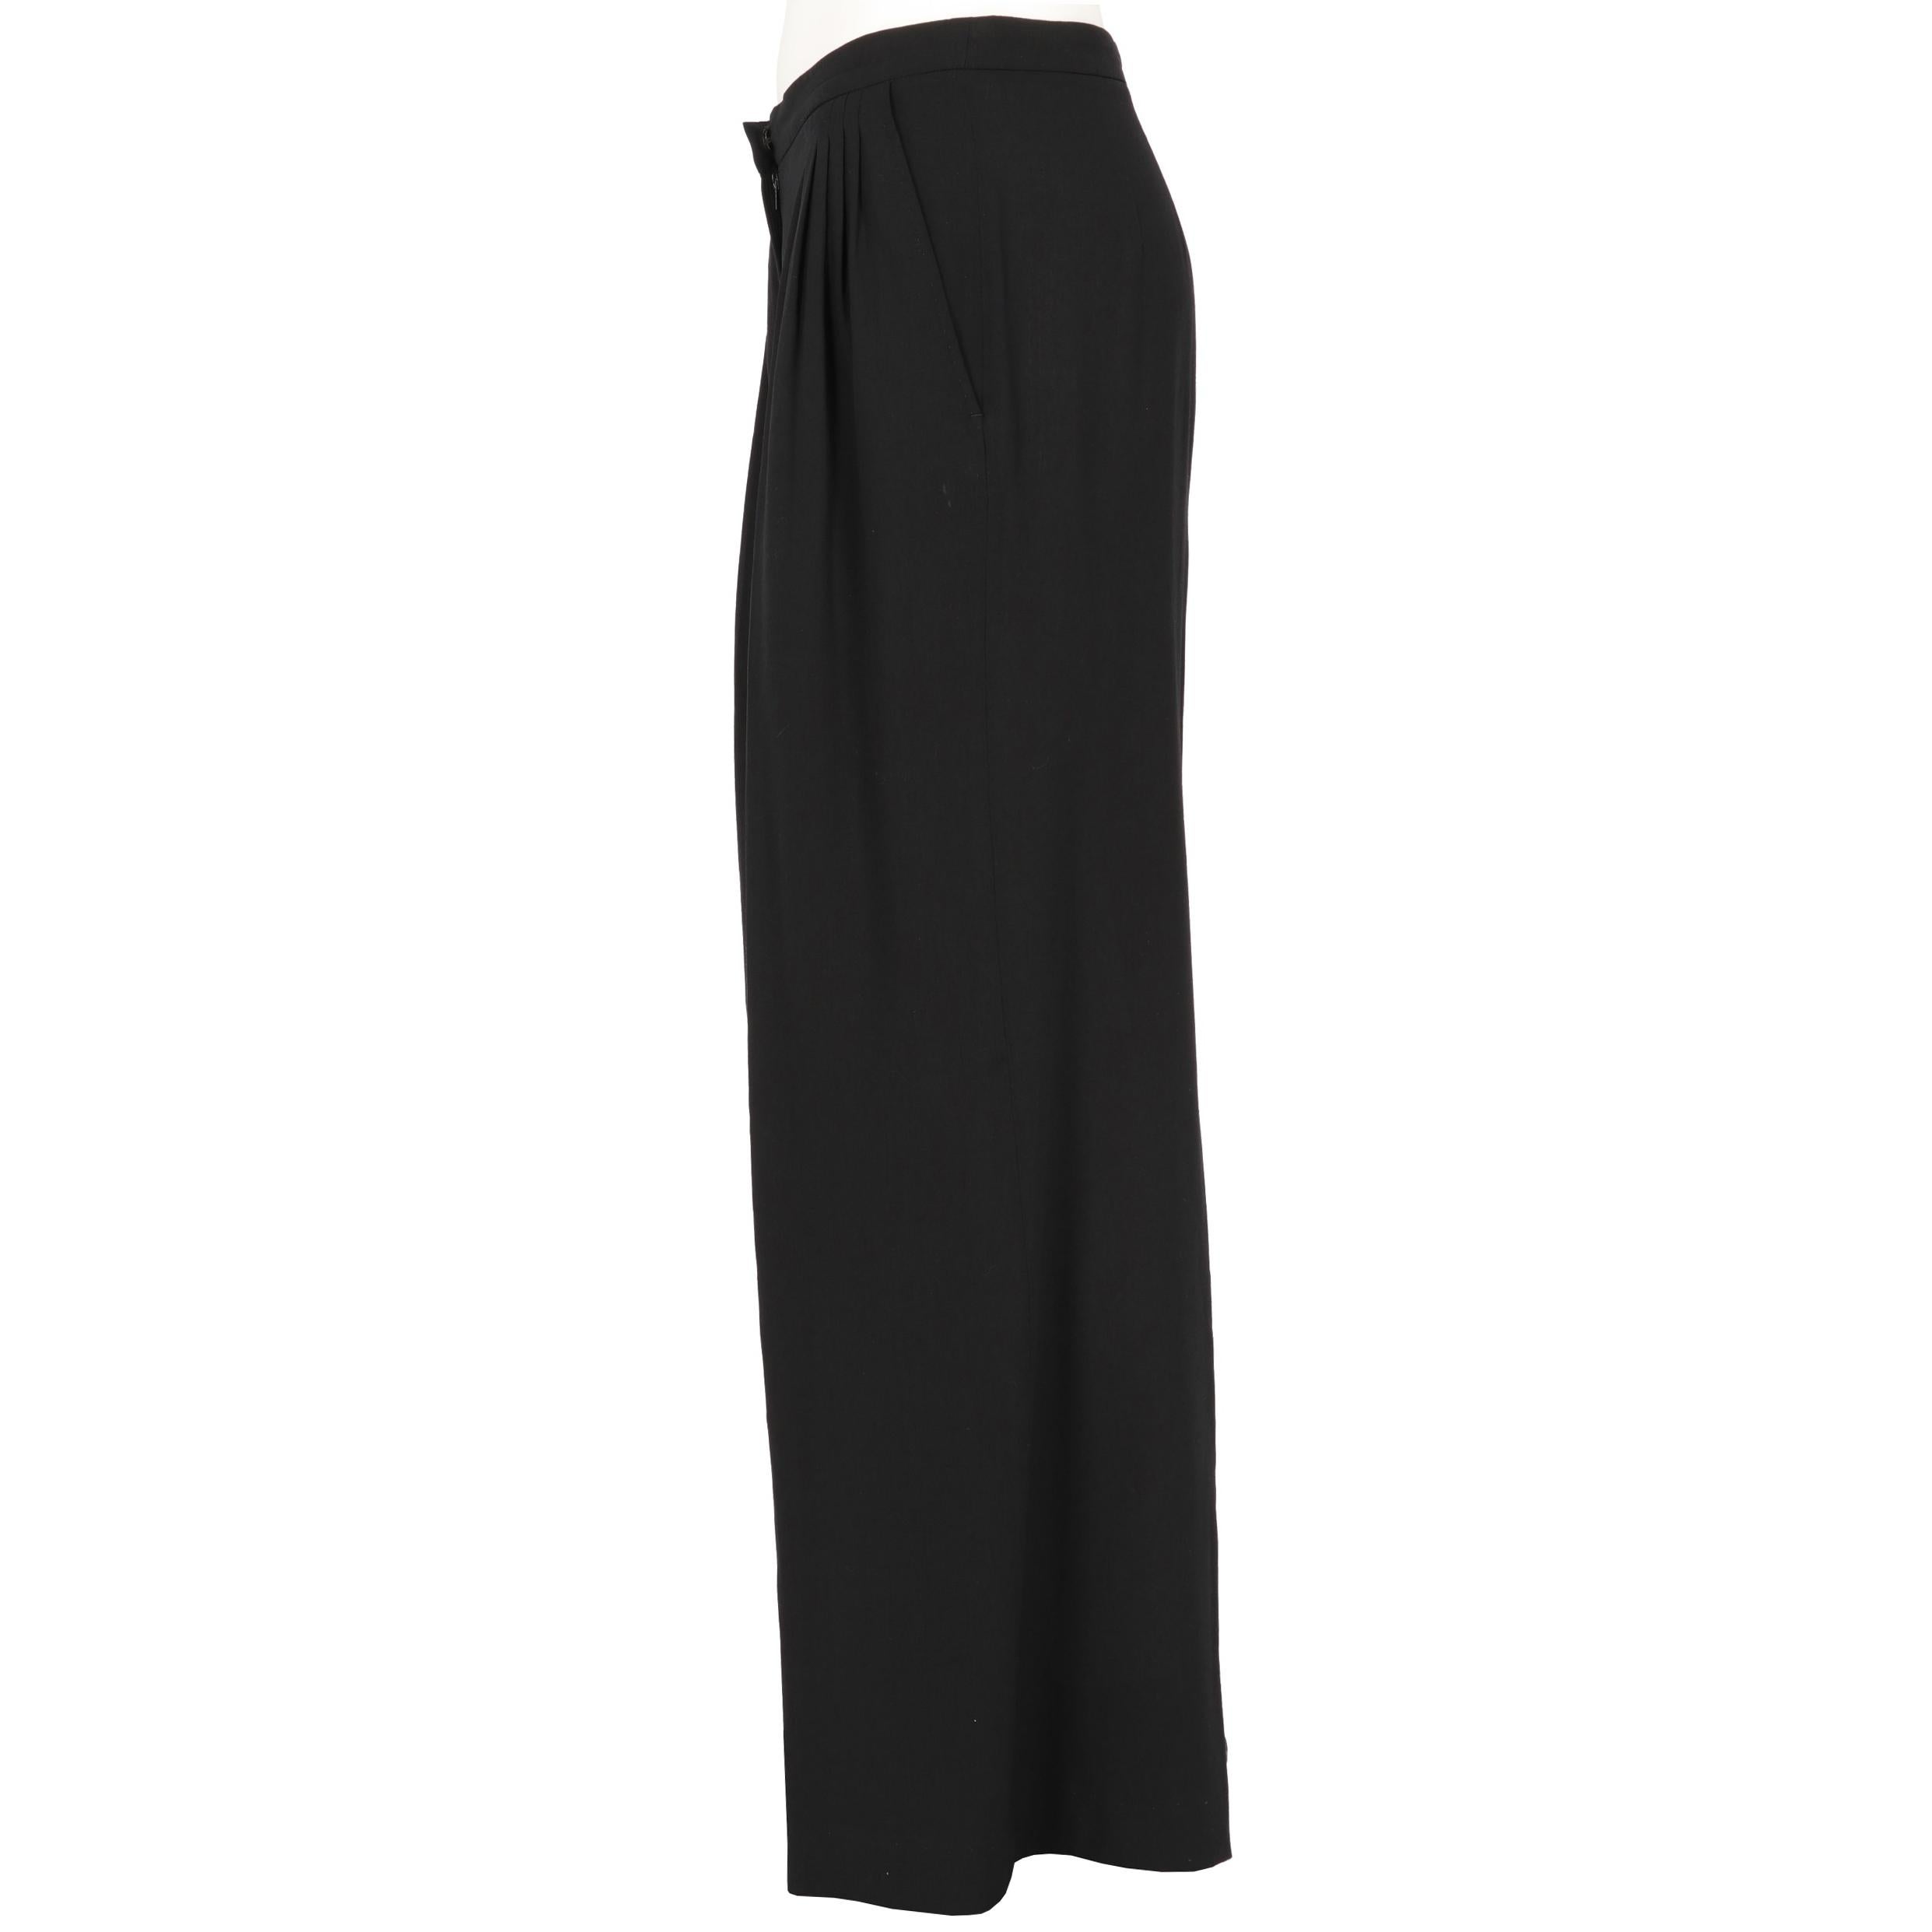 Dries Van Noten black wool blend trousers. High waist and wide leg. Central hidden closure with double button and zip fastening. Decorative waist darts. Lateral welt pockets.

Size: 36 FR  

Flat measurements
Waist: 36 cm
Lenght: 99 cm

Product